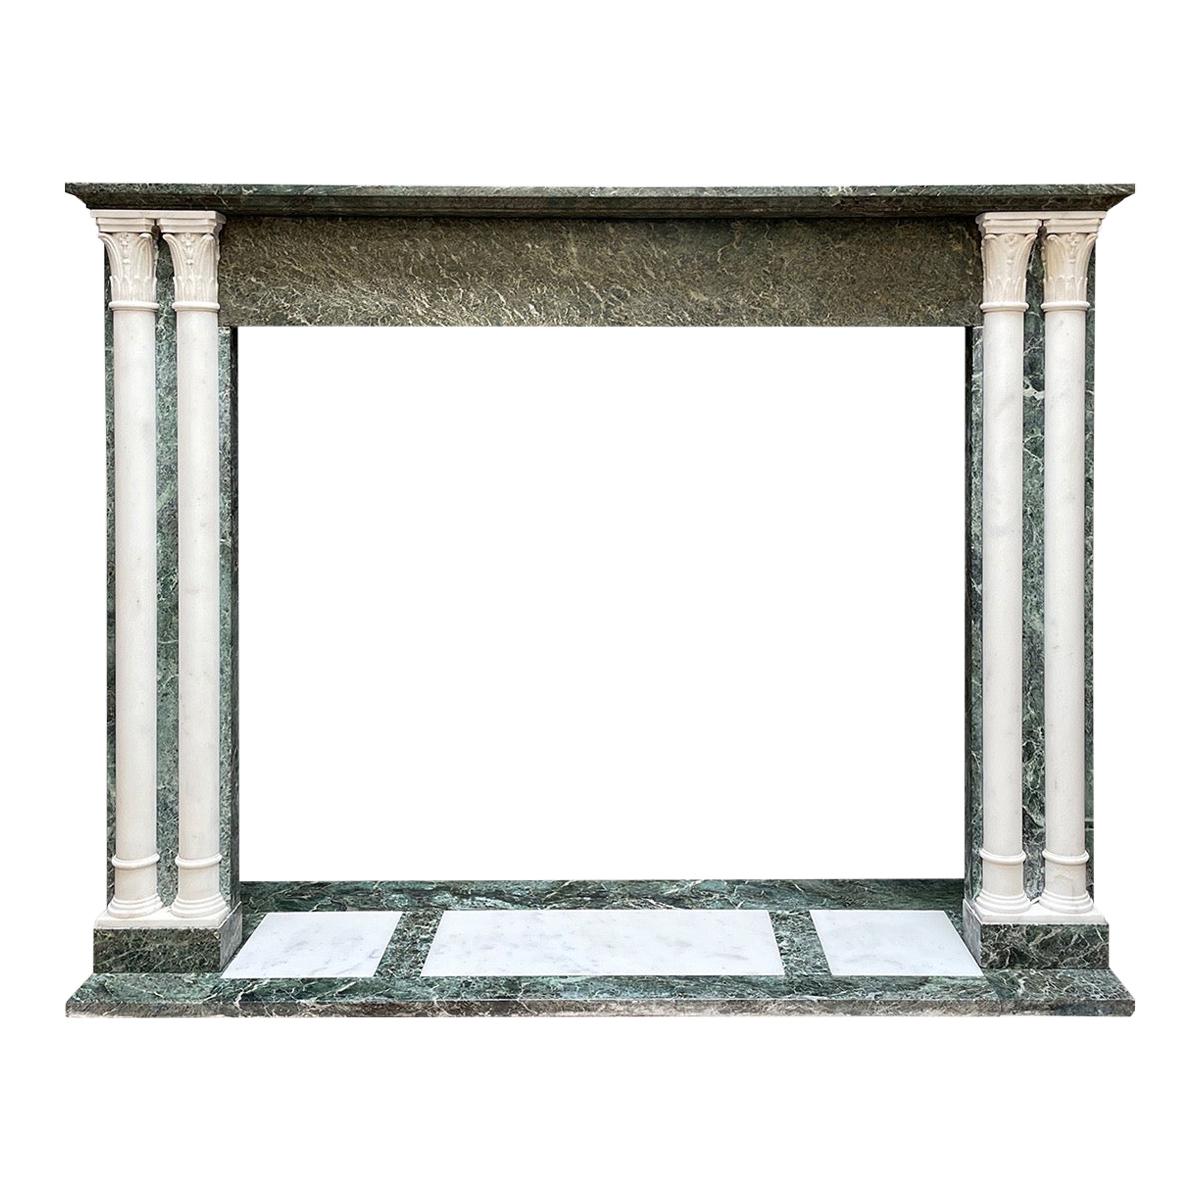 Antique French Fireplace Mantel in Verdi Antico and Statuary Marble For Sale